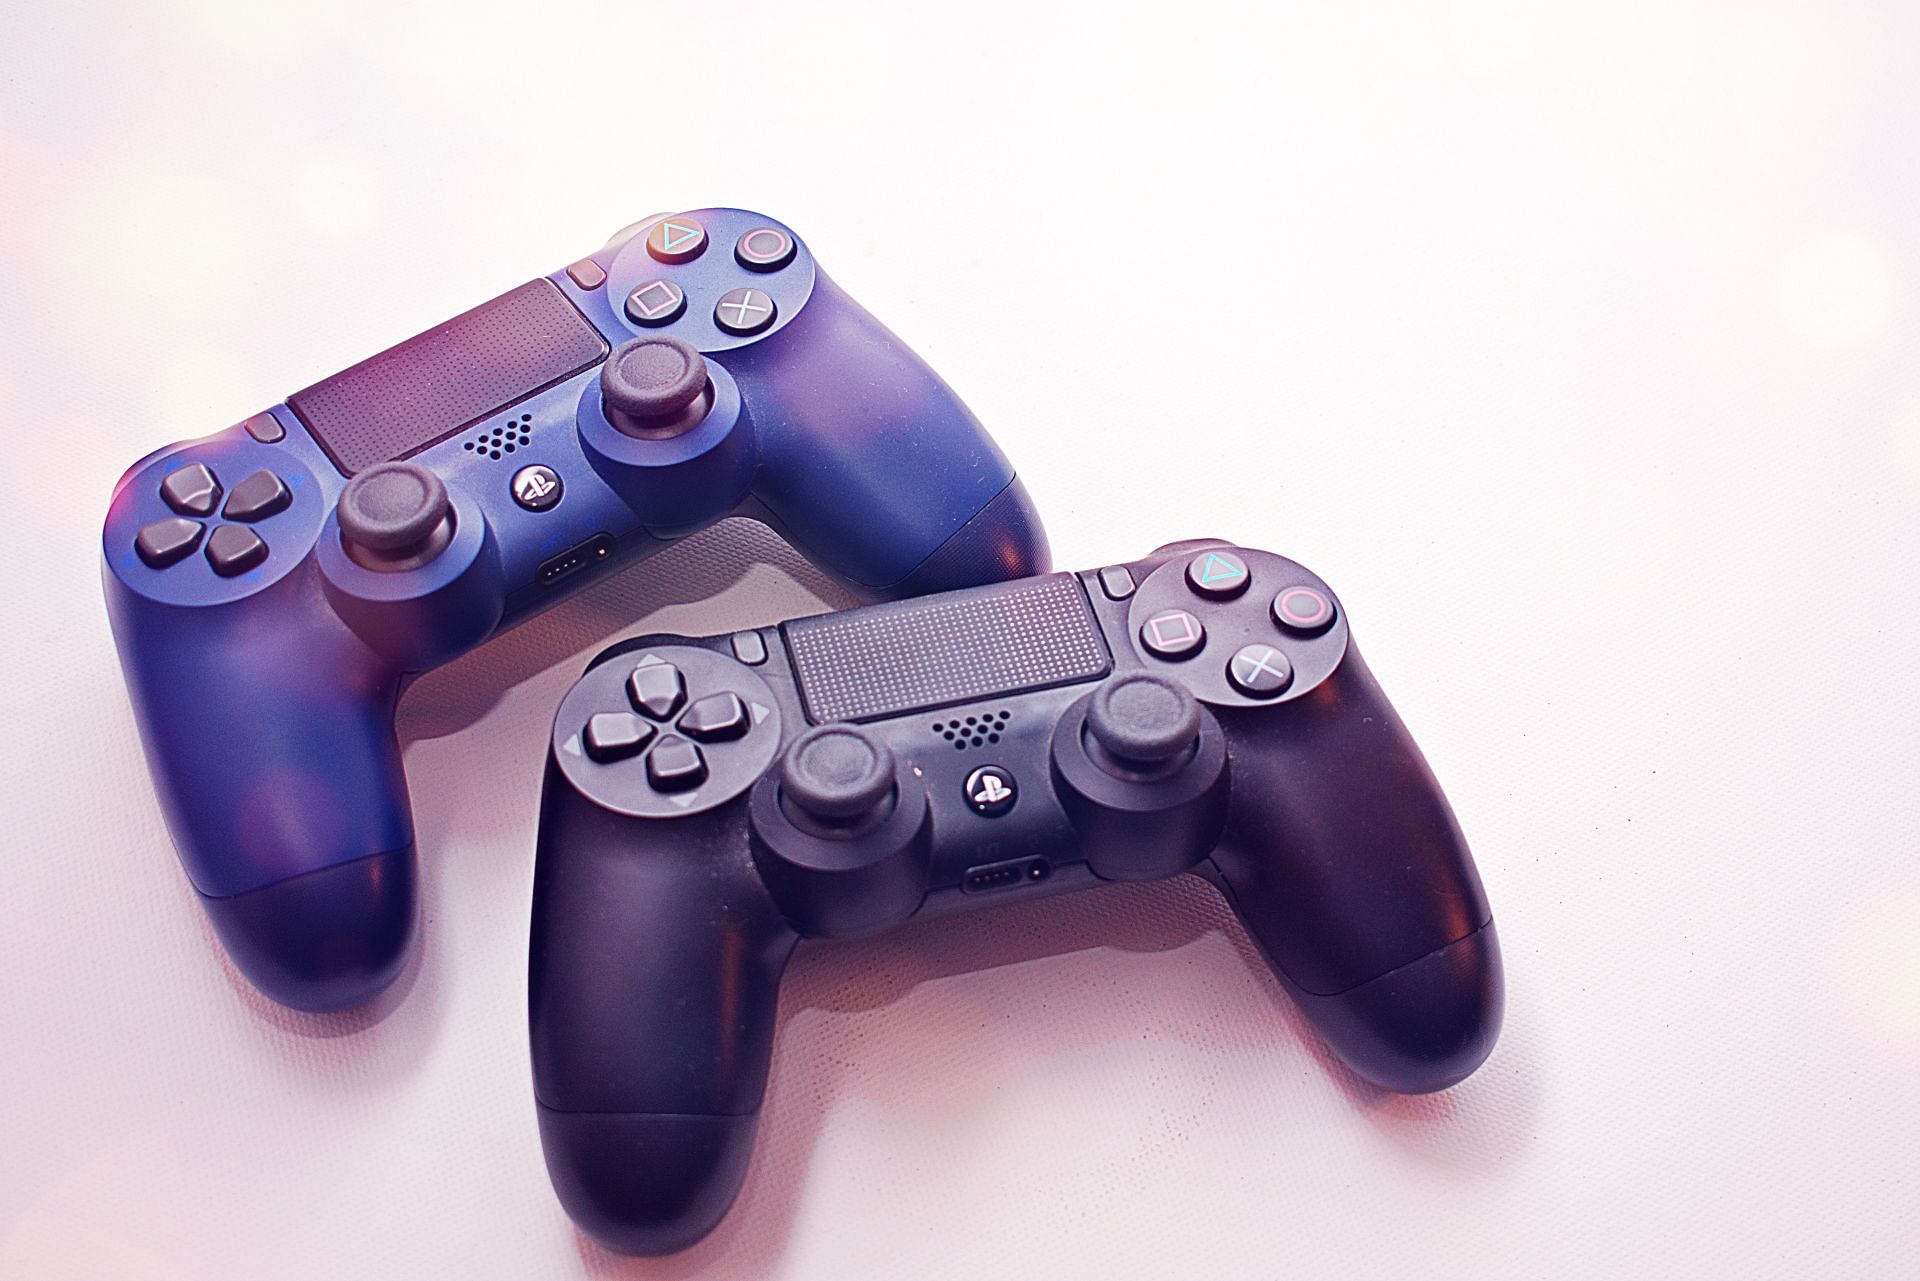 PS4 controller is one of the options available to players (Image via pexels)